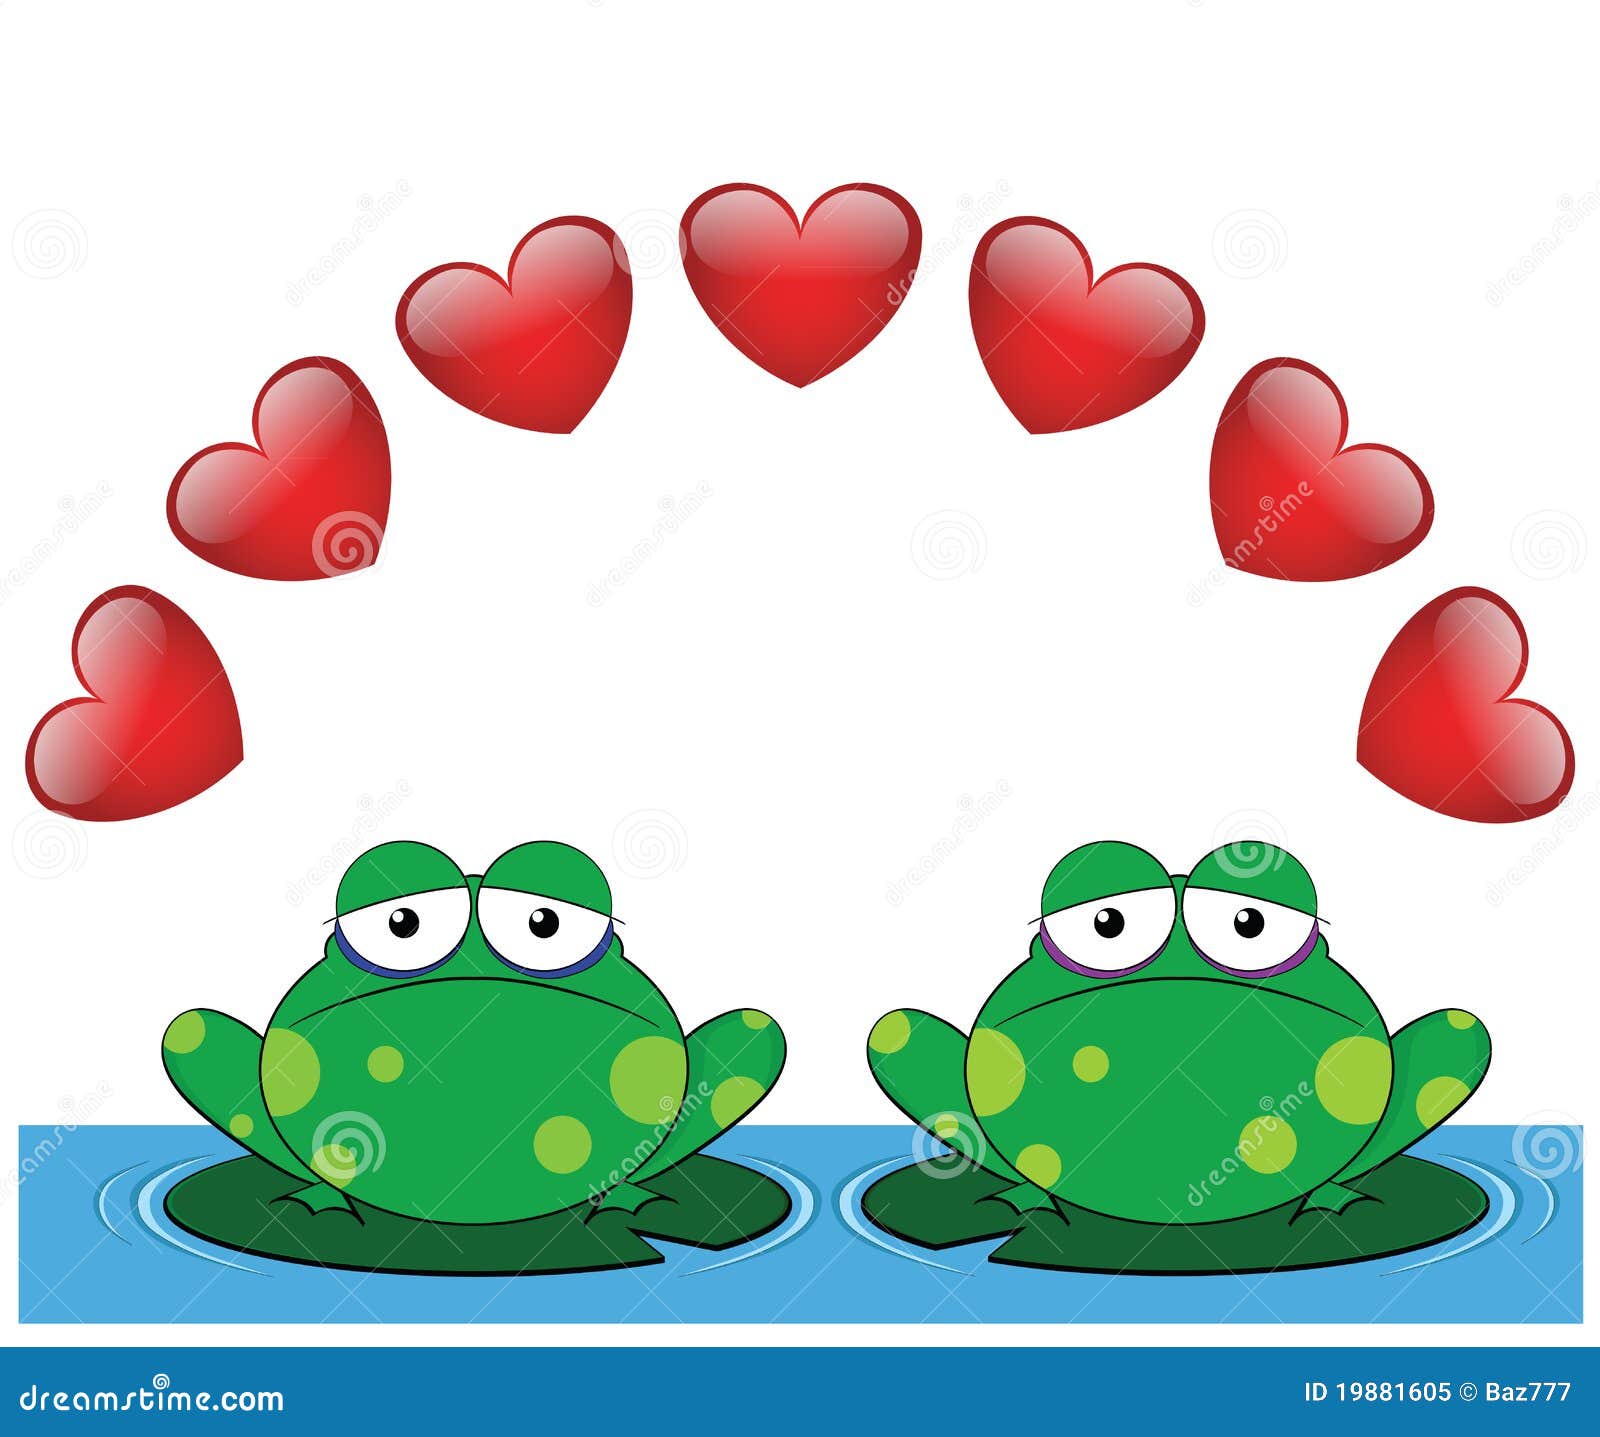 Frog valentine stock vector. Illustration of passionate - 19881605